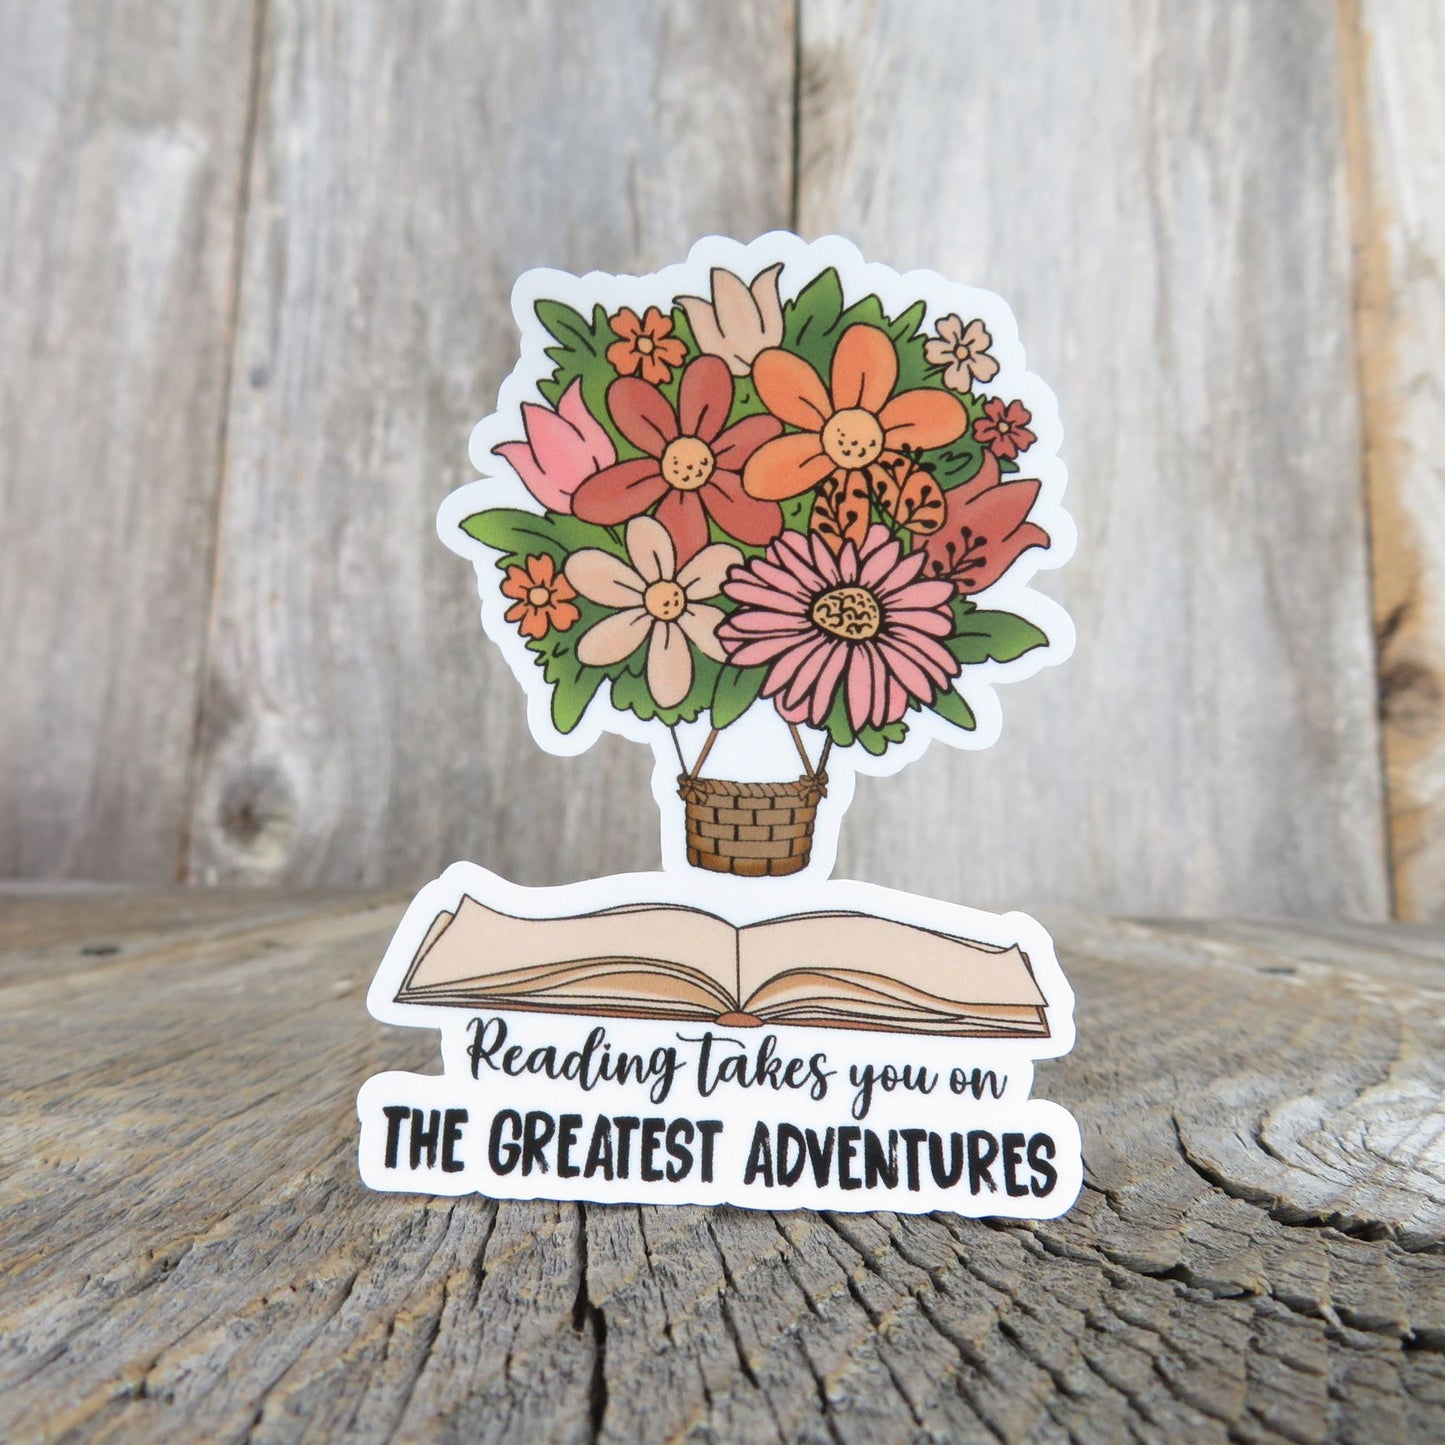 Reading Takes You on the Greatest Adventures Sticker Book Lovers Readers Gift Laptop Sticker